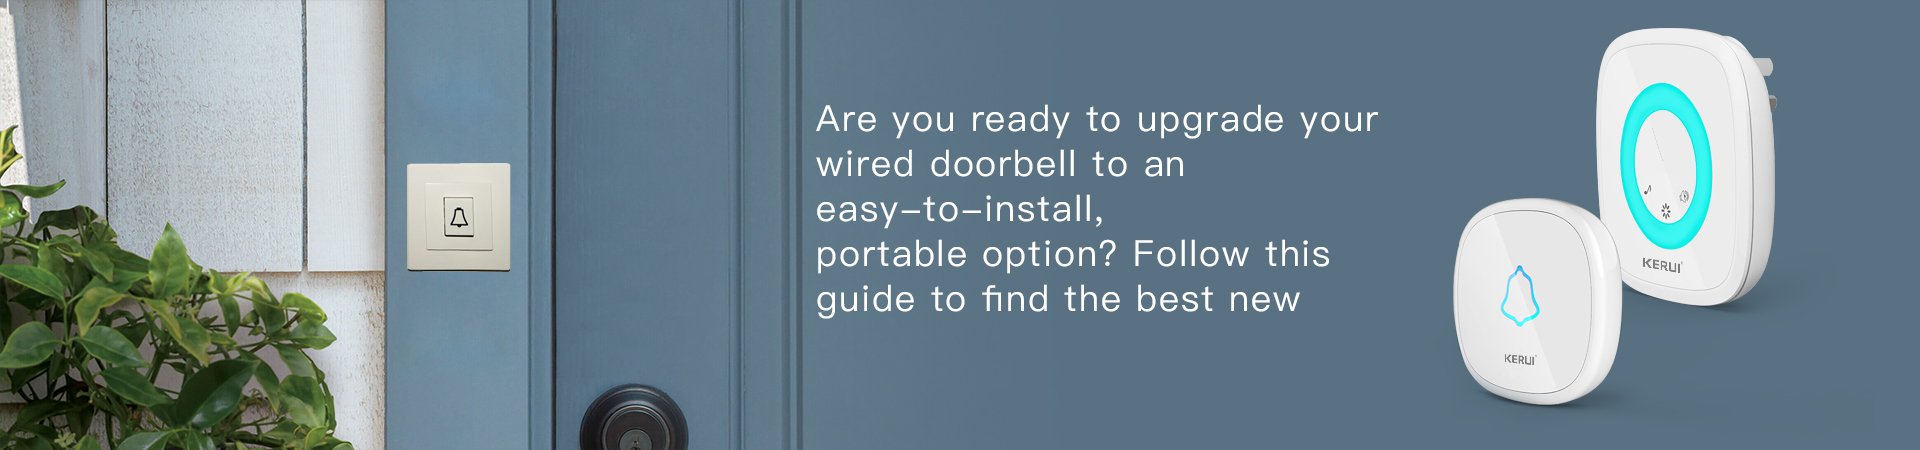 Use a portable doorbell to replace your old one